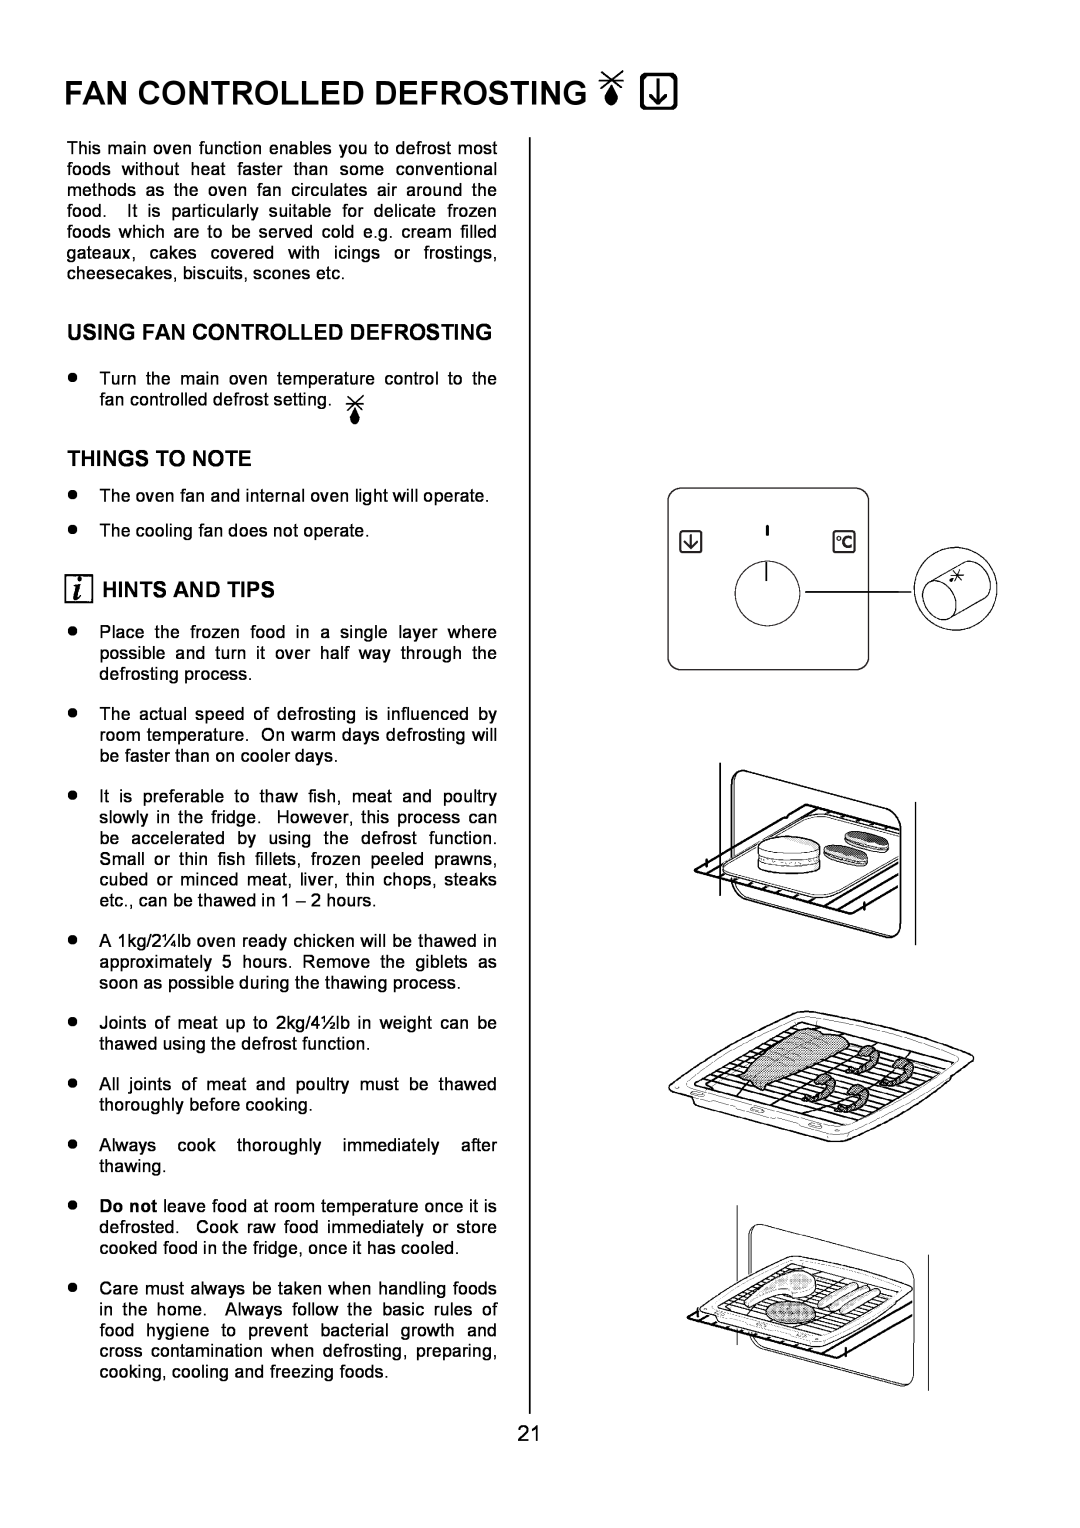 Electrolux U3100-4 manual Using Fan Controlled Defrosting, Things To Note, Hints And Tips 